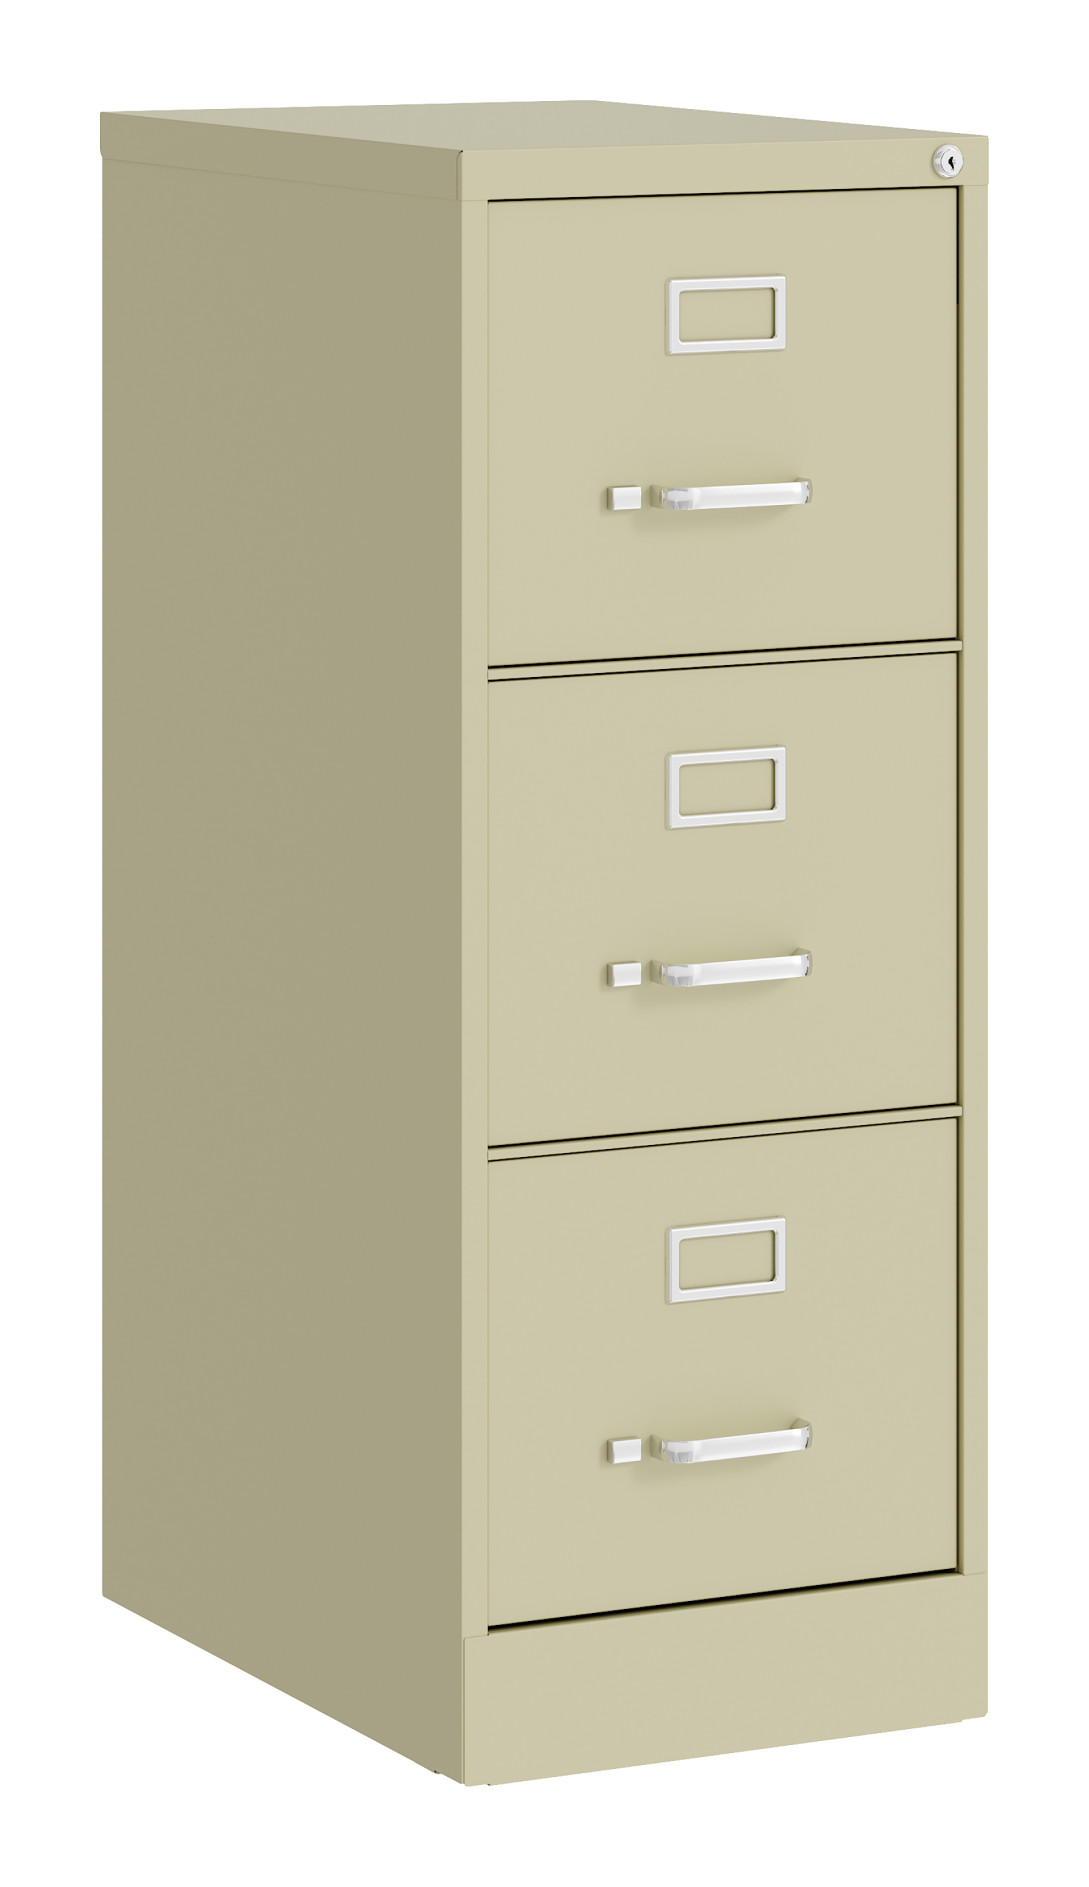 Space Solutions 3 Drawer Metal Vertical File Cabinet with Lock